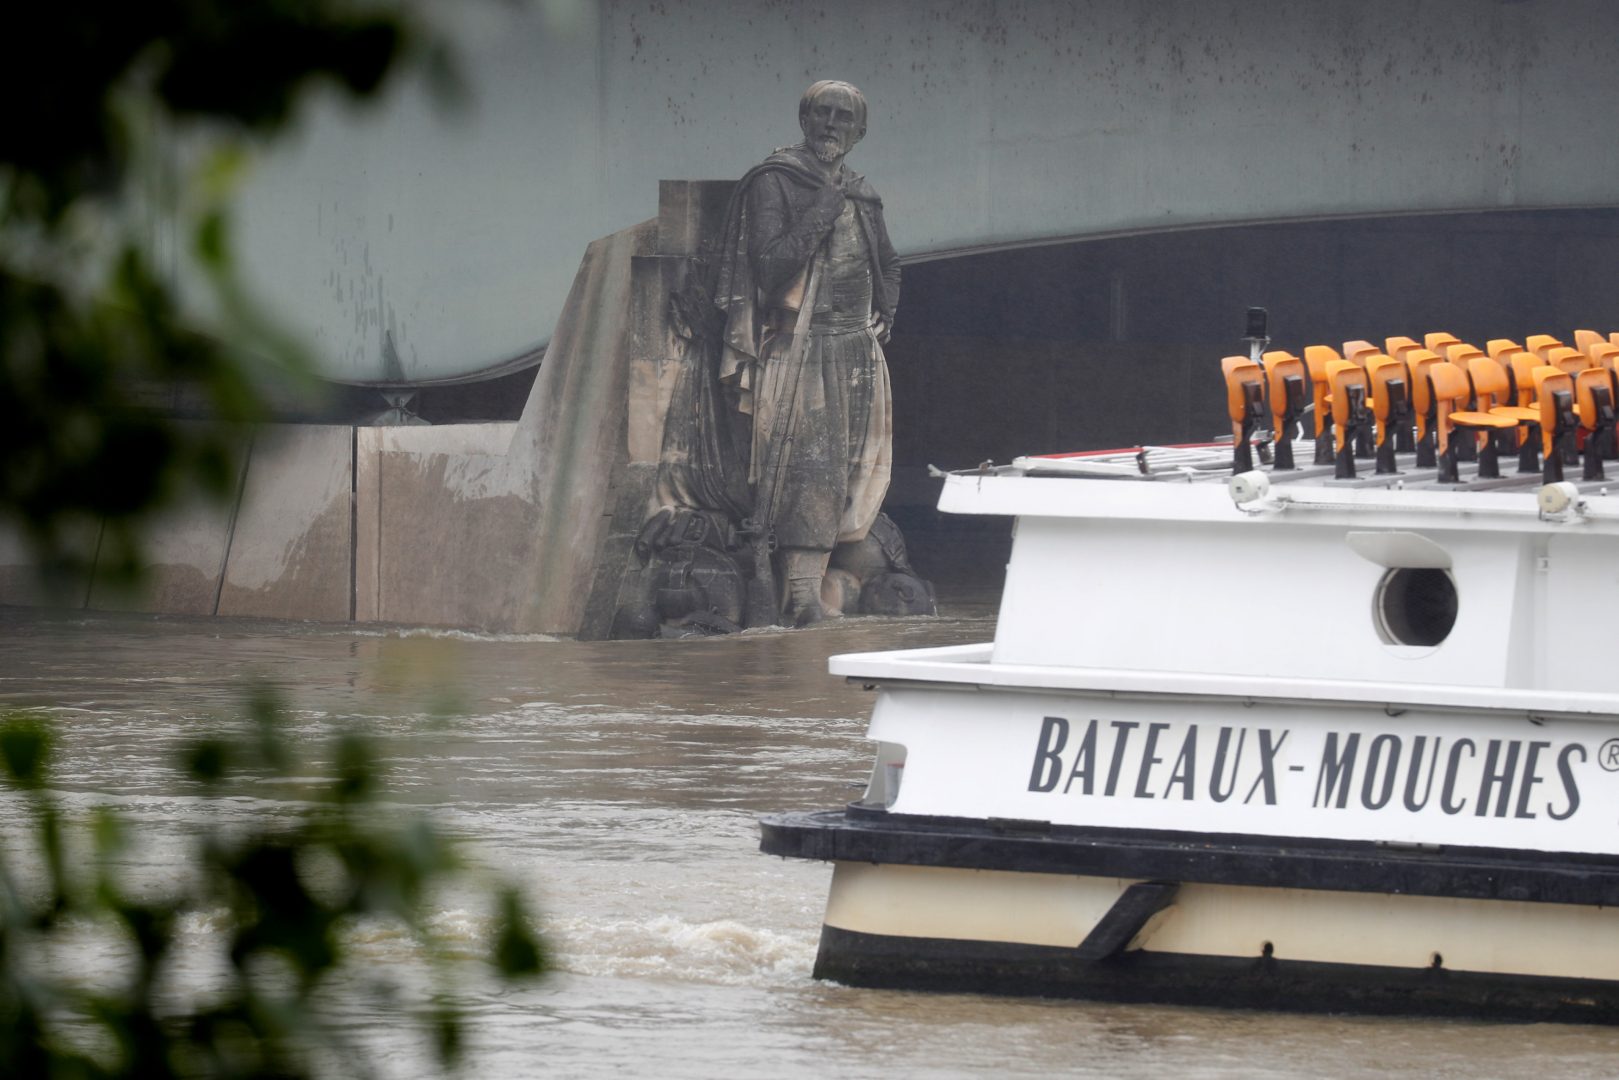 A "Bateaux Mouches" tourist boat approaches the Zouave statue on the Pont de l'Alma as high waters causes minor flooding along the Seine River in Paris, France, May 31, 2016 as the Zouave statue is considered an indicator of the level of the Seine, when his feet are under water, emergency flood precautions are taken. REUTERS/Charles Platiau